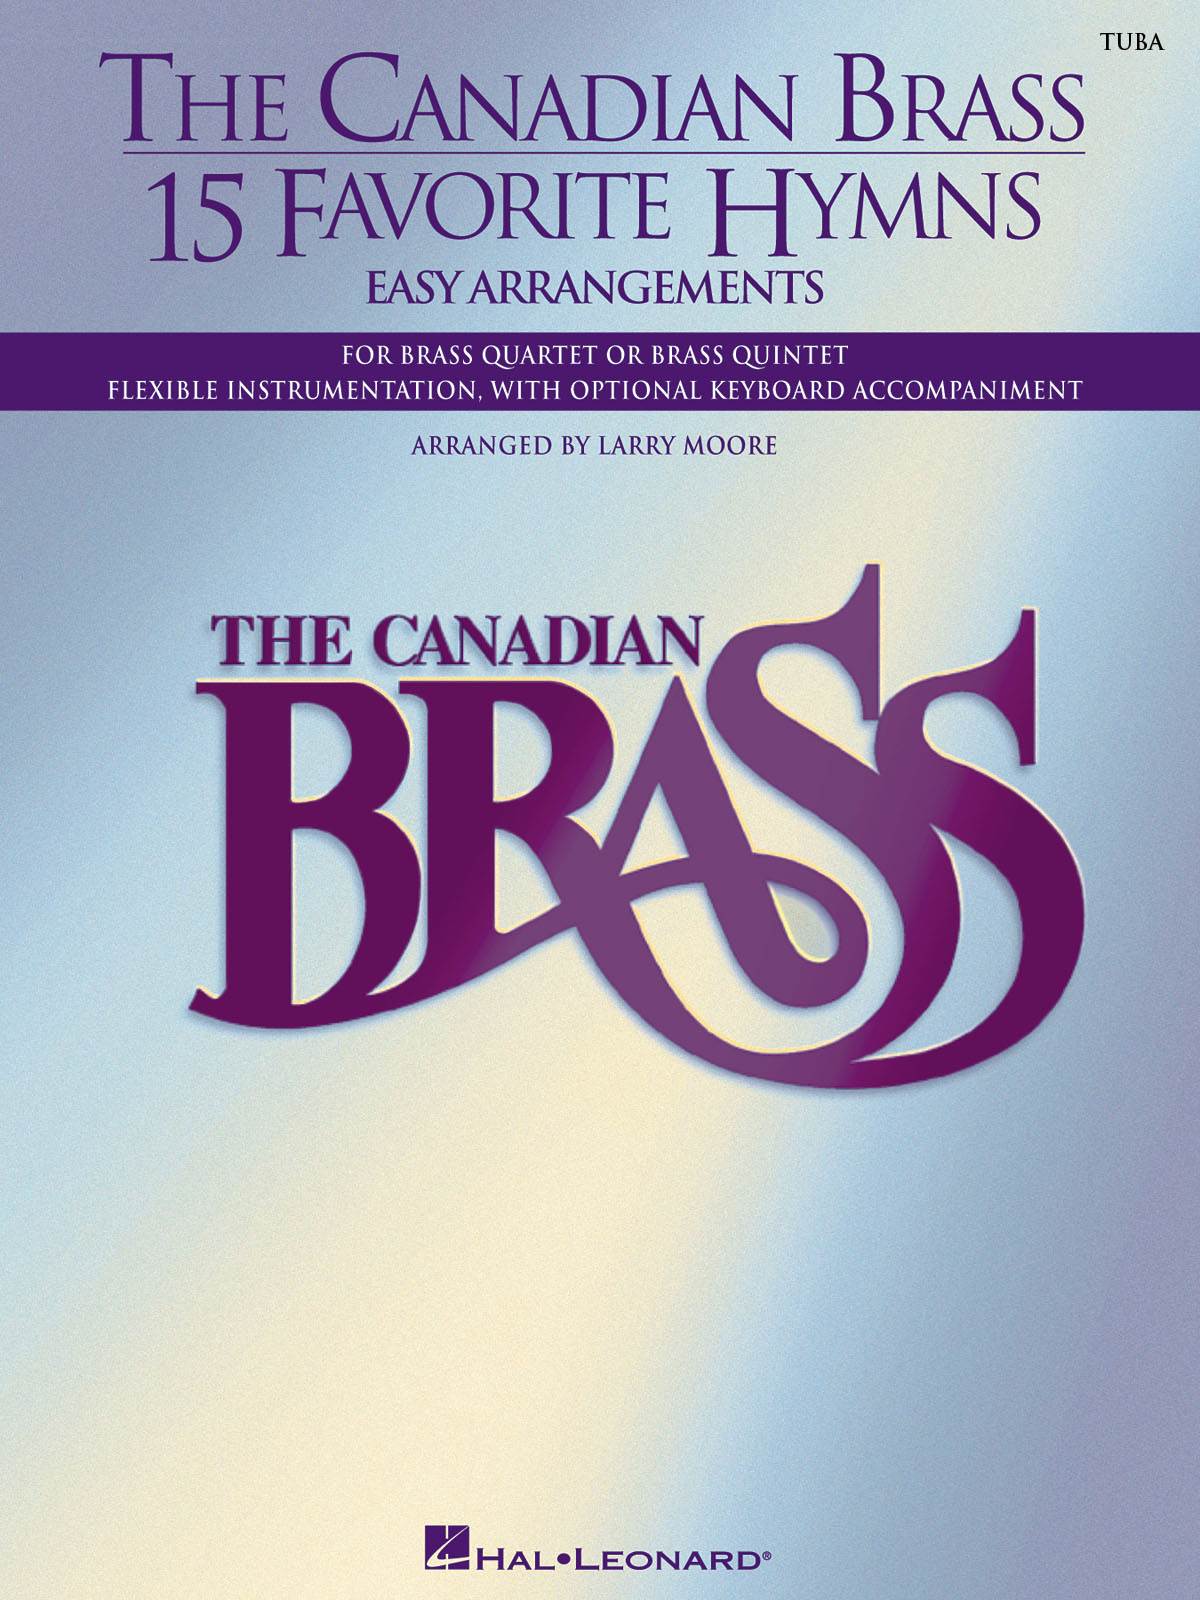 The Canadian Brass - 15 Favorite Hymns: Tuba: Part